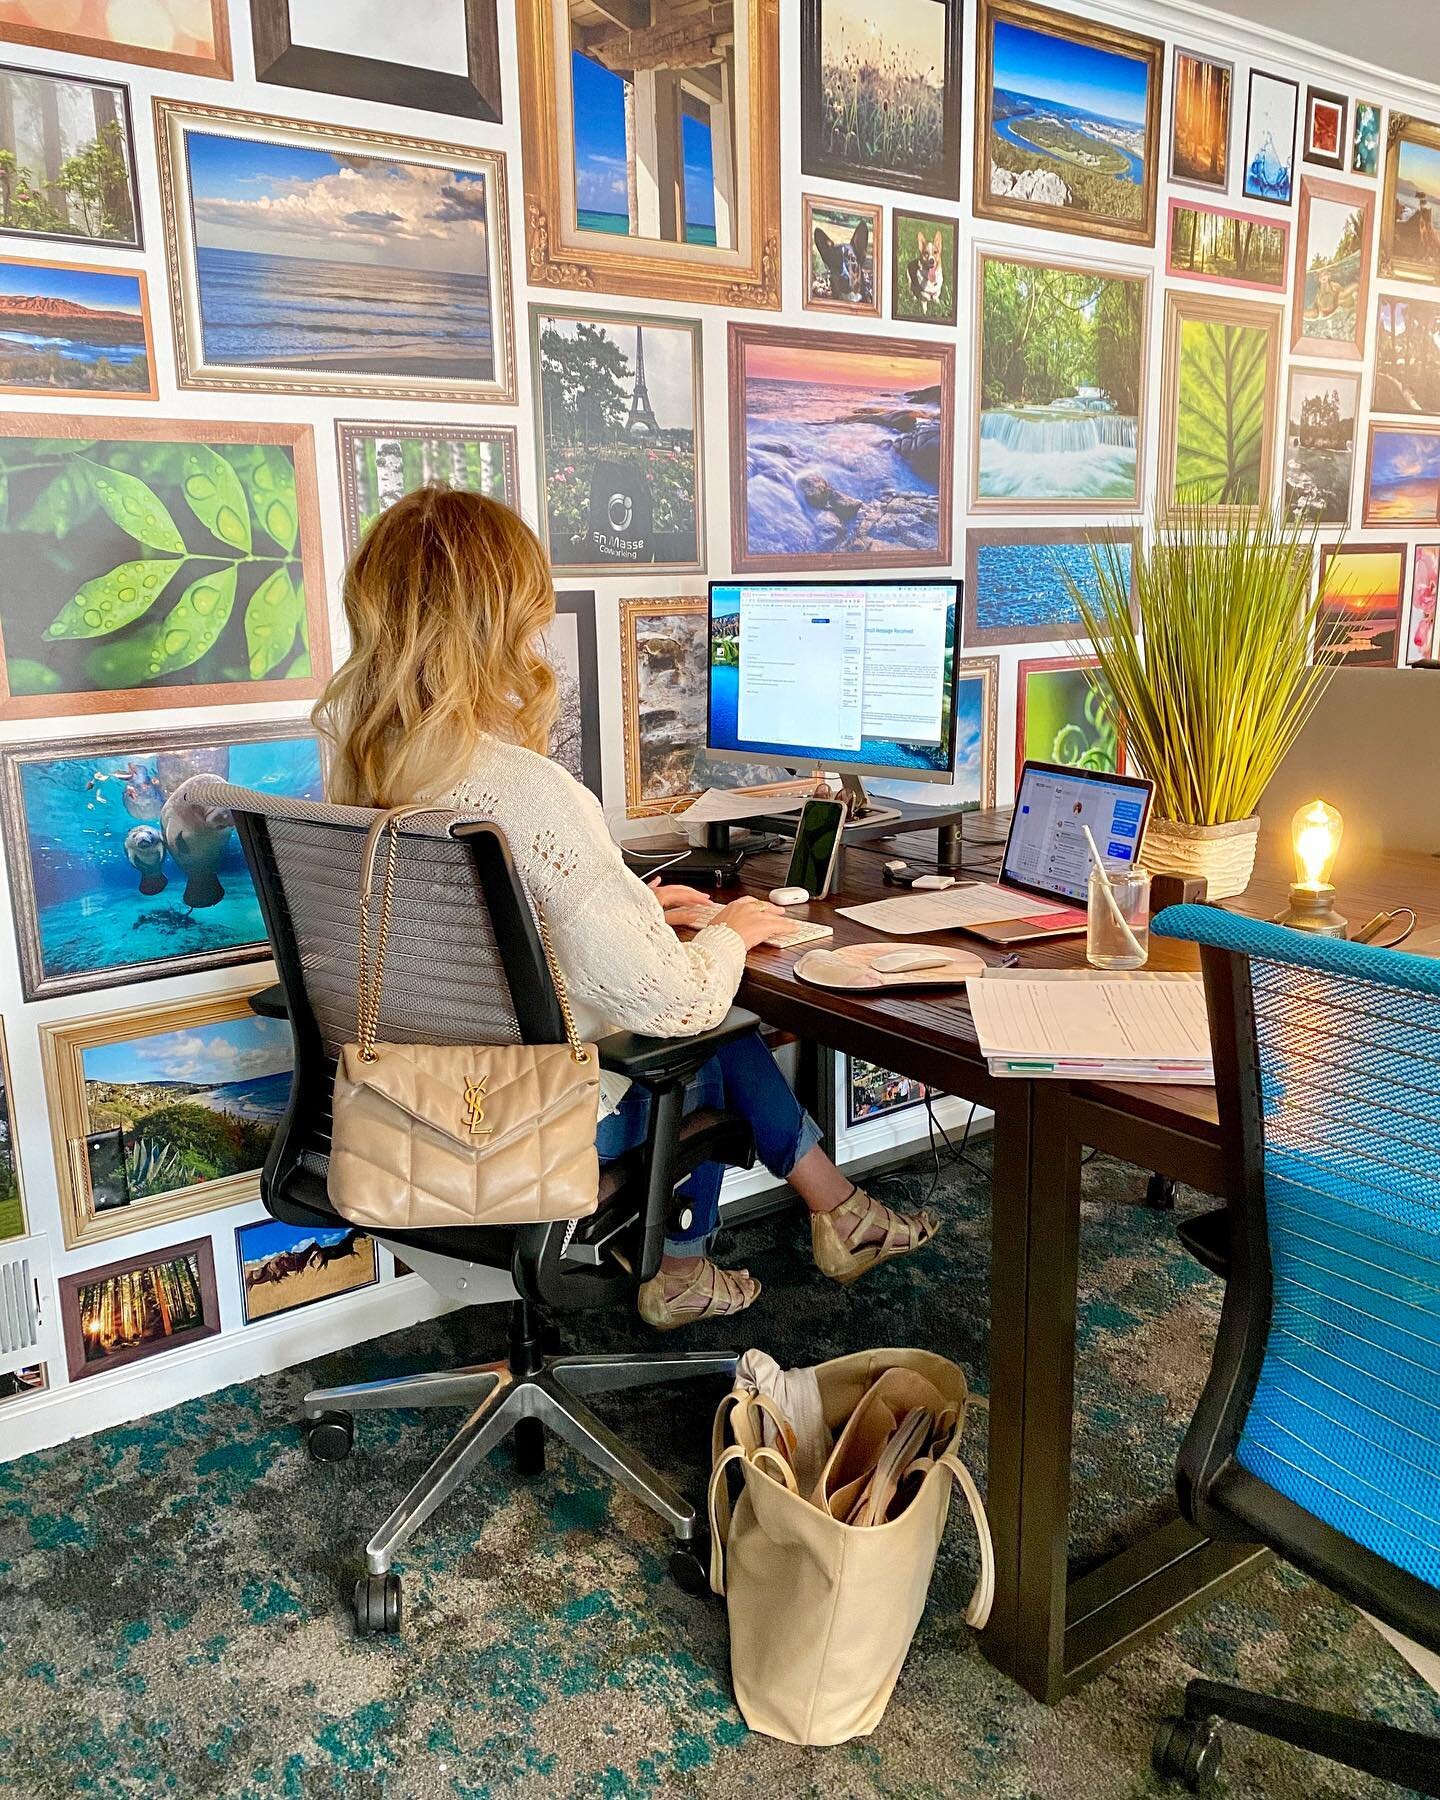 Our Open Desk members love to rotate throughout our space and choose different spots to work for the day! #Coworking #MemberPerks #OpenDesk #DayPass #MorristownNJ